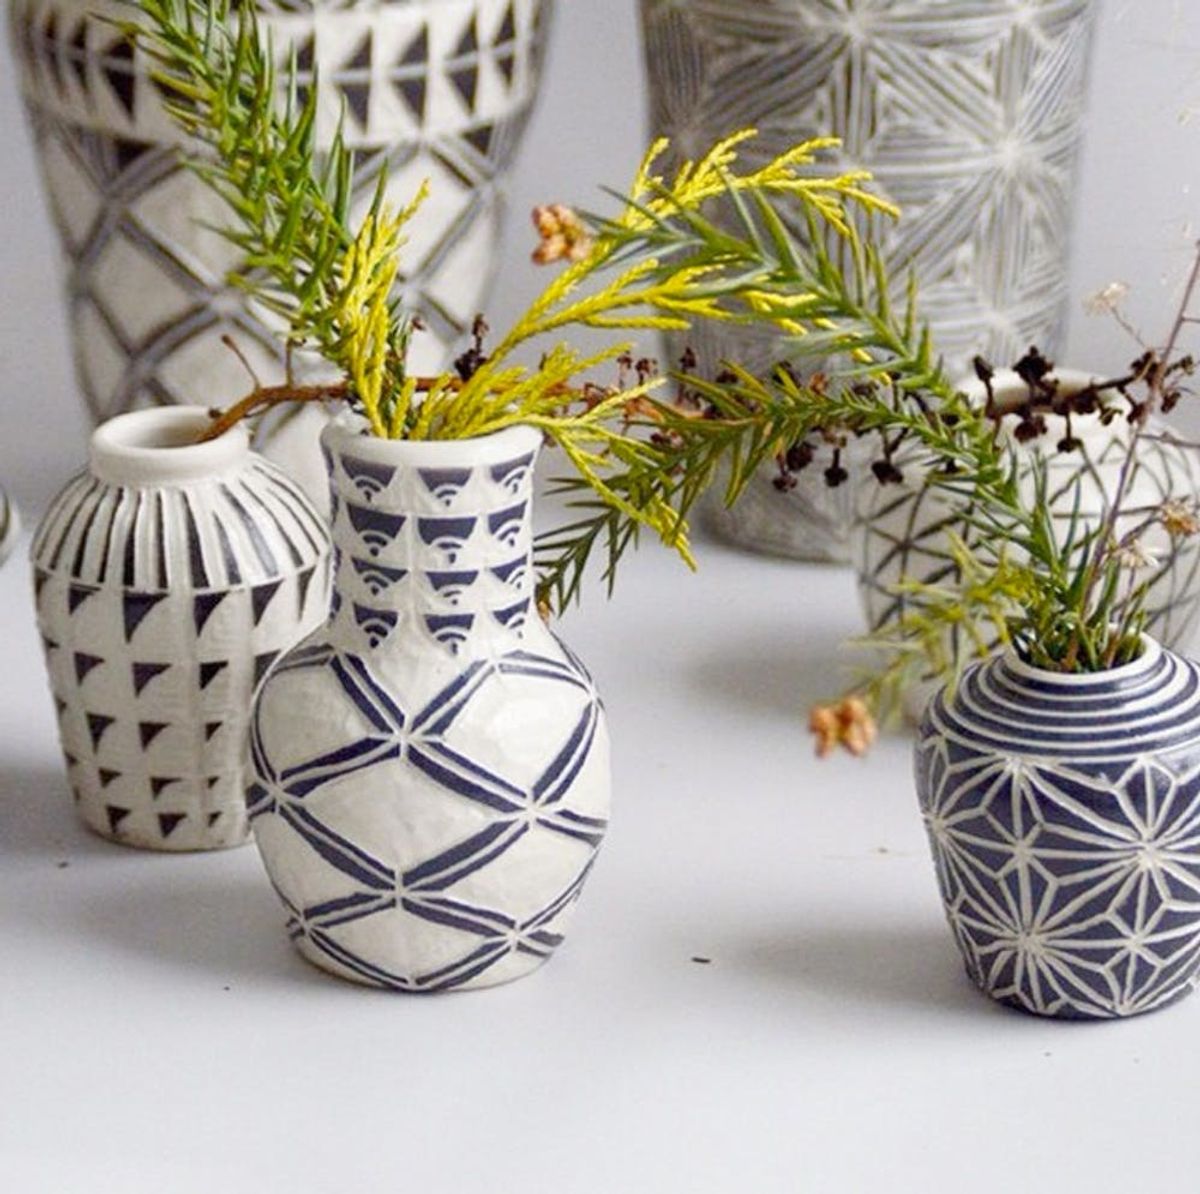 How to Quit Your Day Job and Pursue a Career in Ceramics